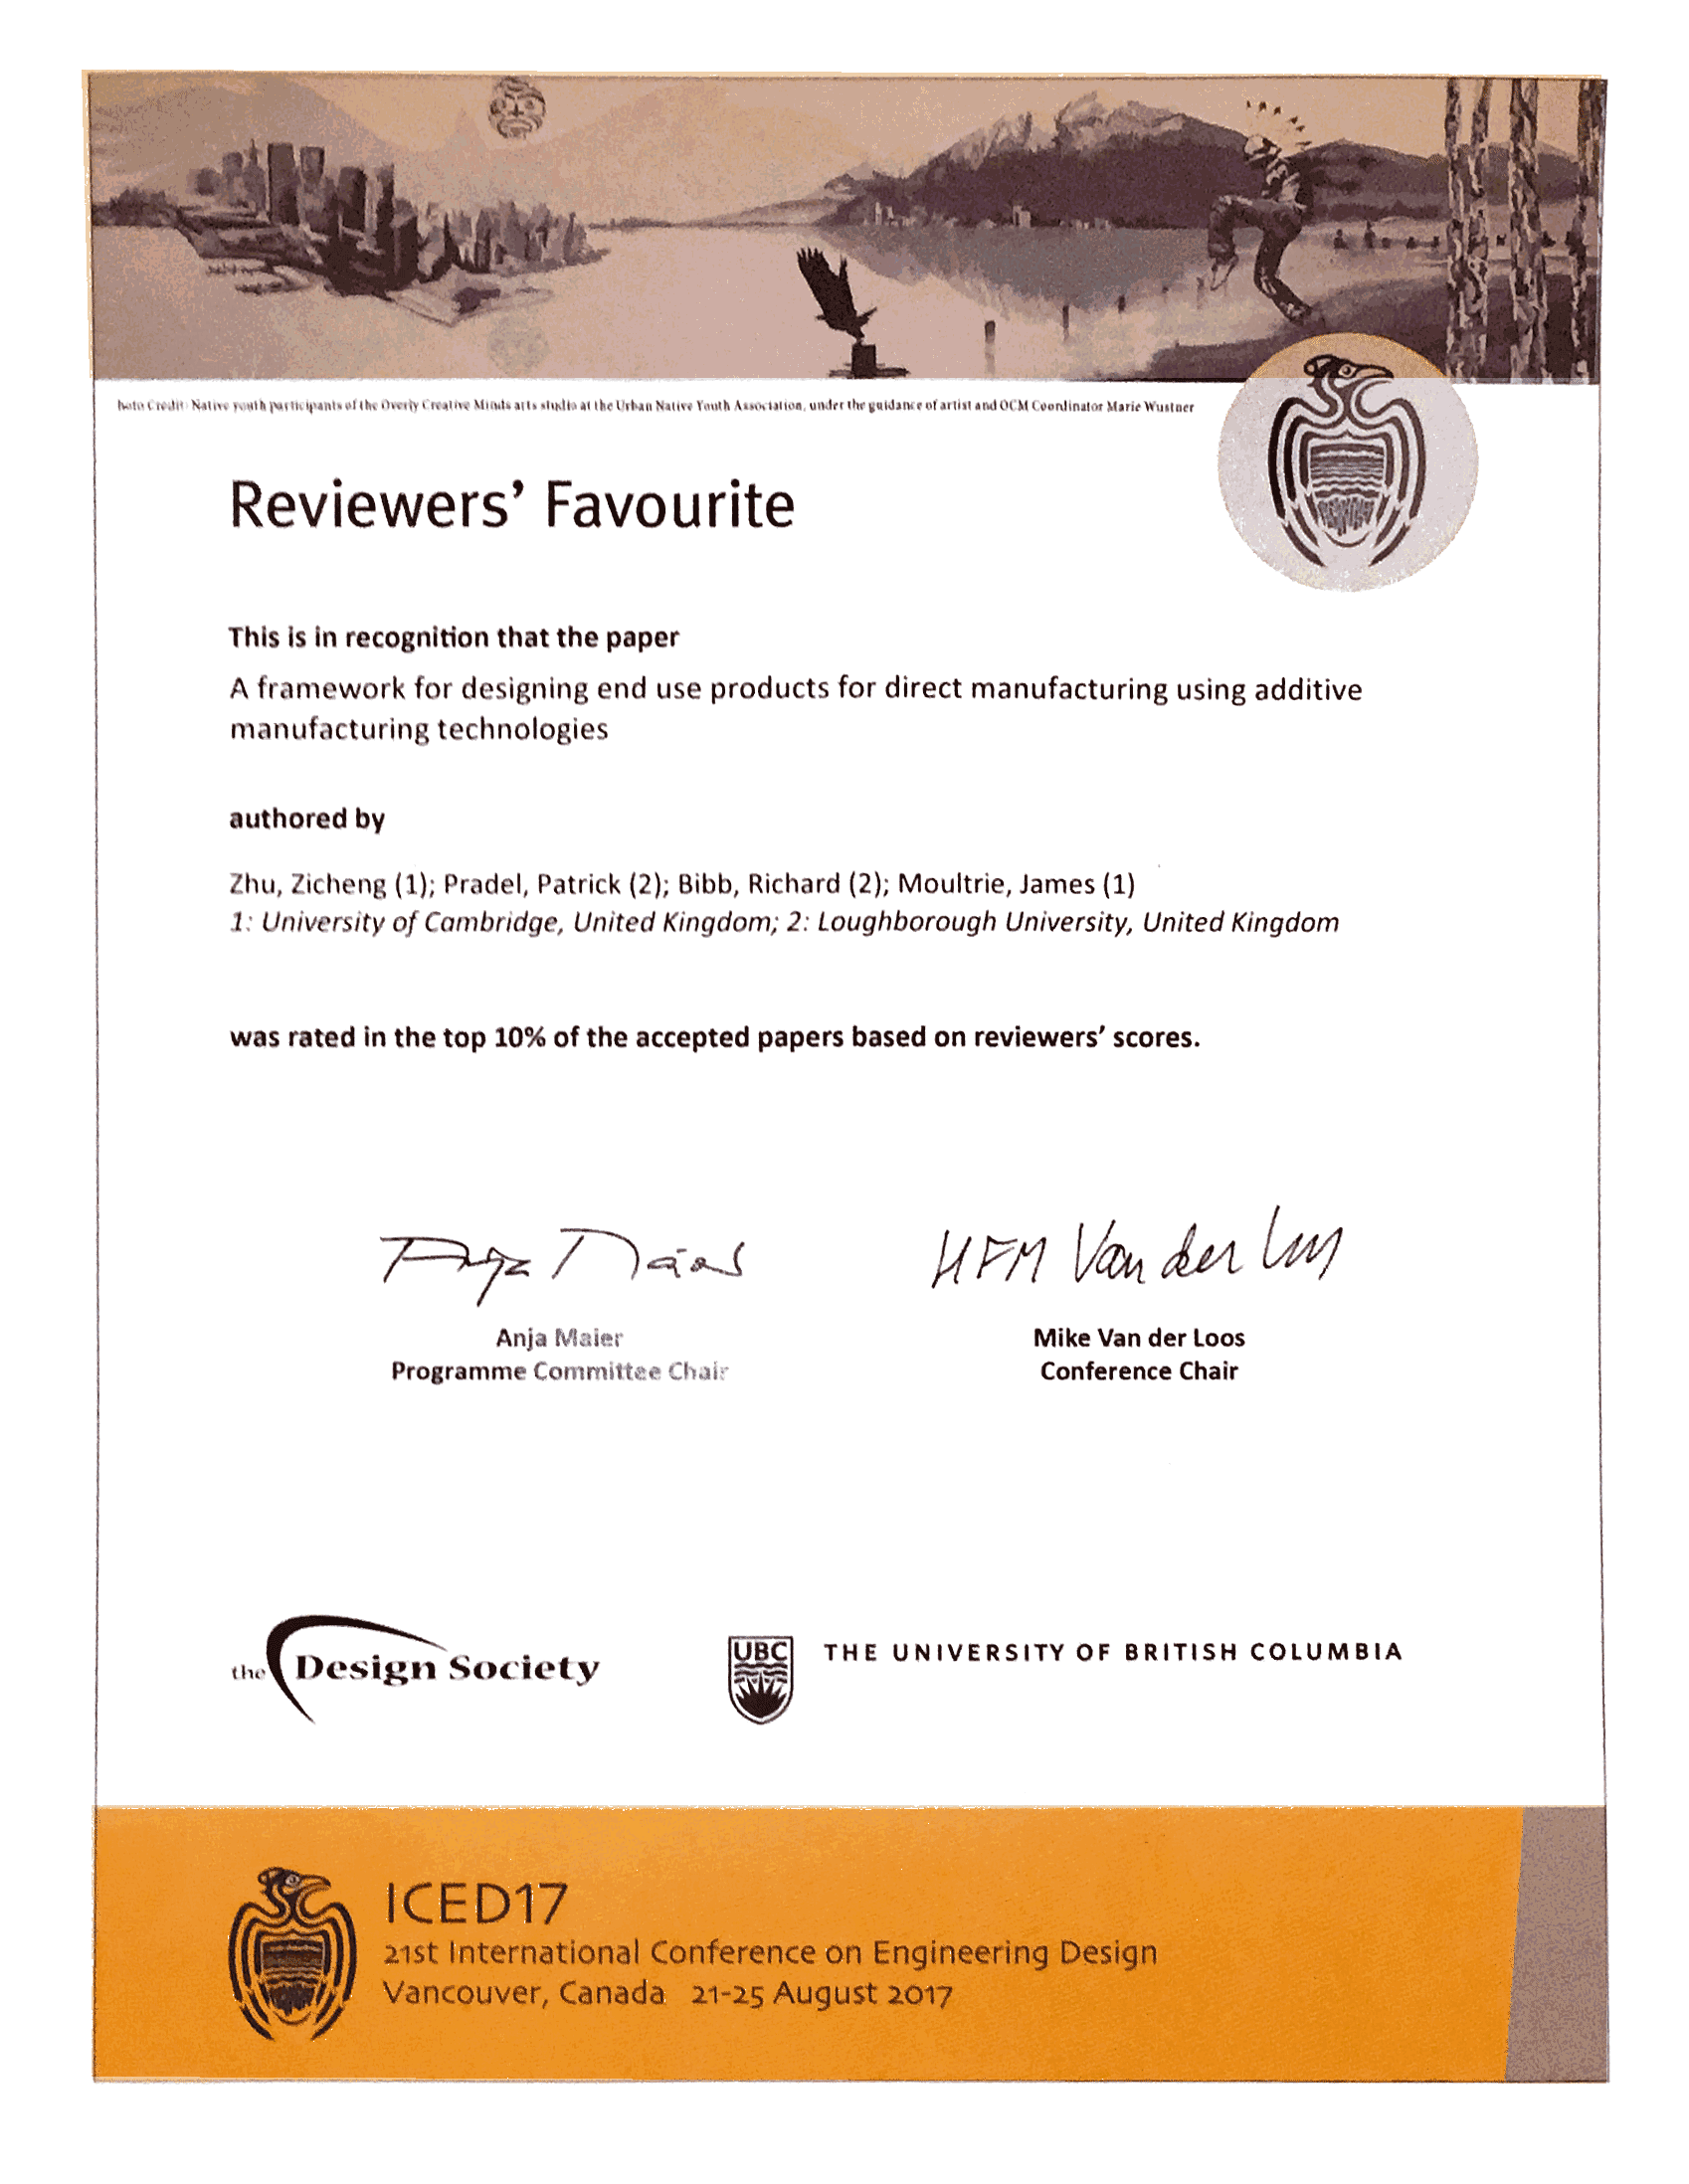 ICED top paper certificate